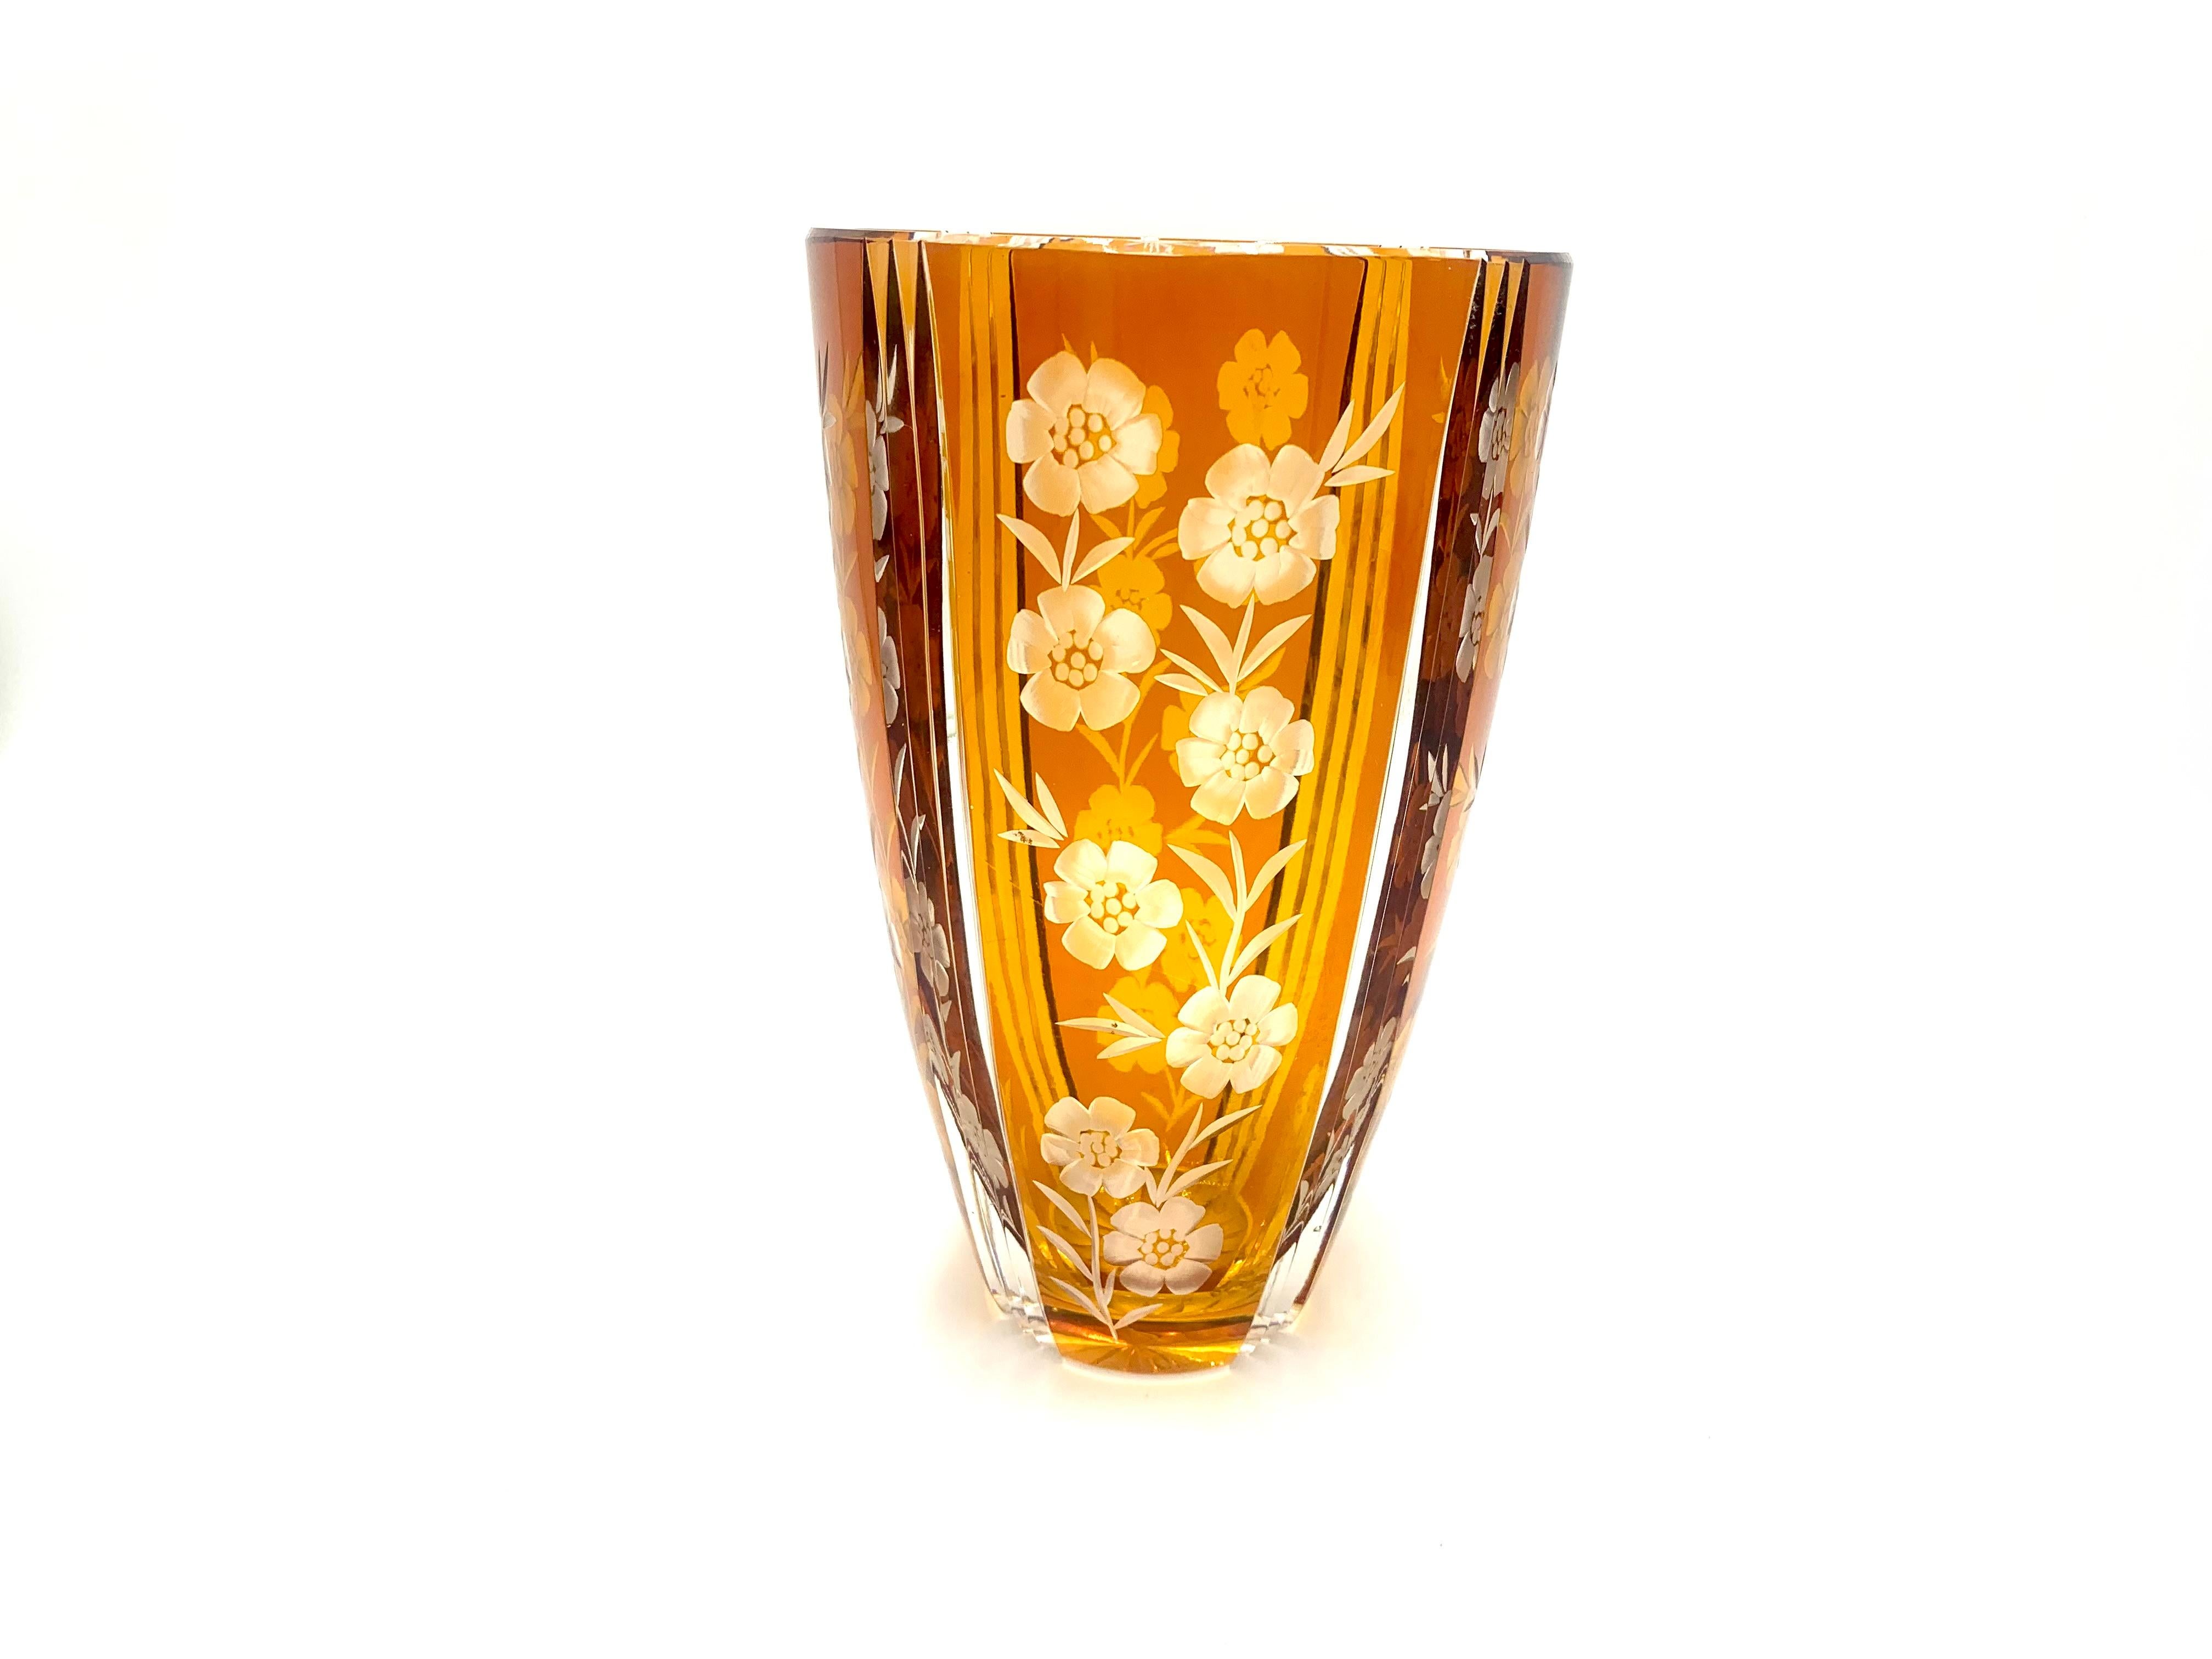 An amber colored crystal vase with a floral motif.

Manufactured in the mid-twentieth century by Huta Józefina.

Measures: height 23cm, diameter of the outlet 14cm.